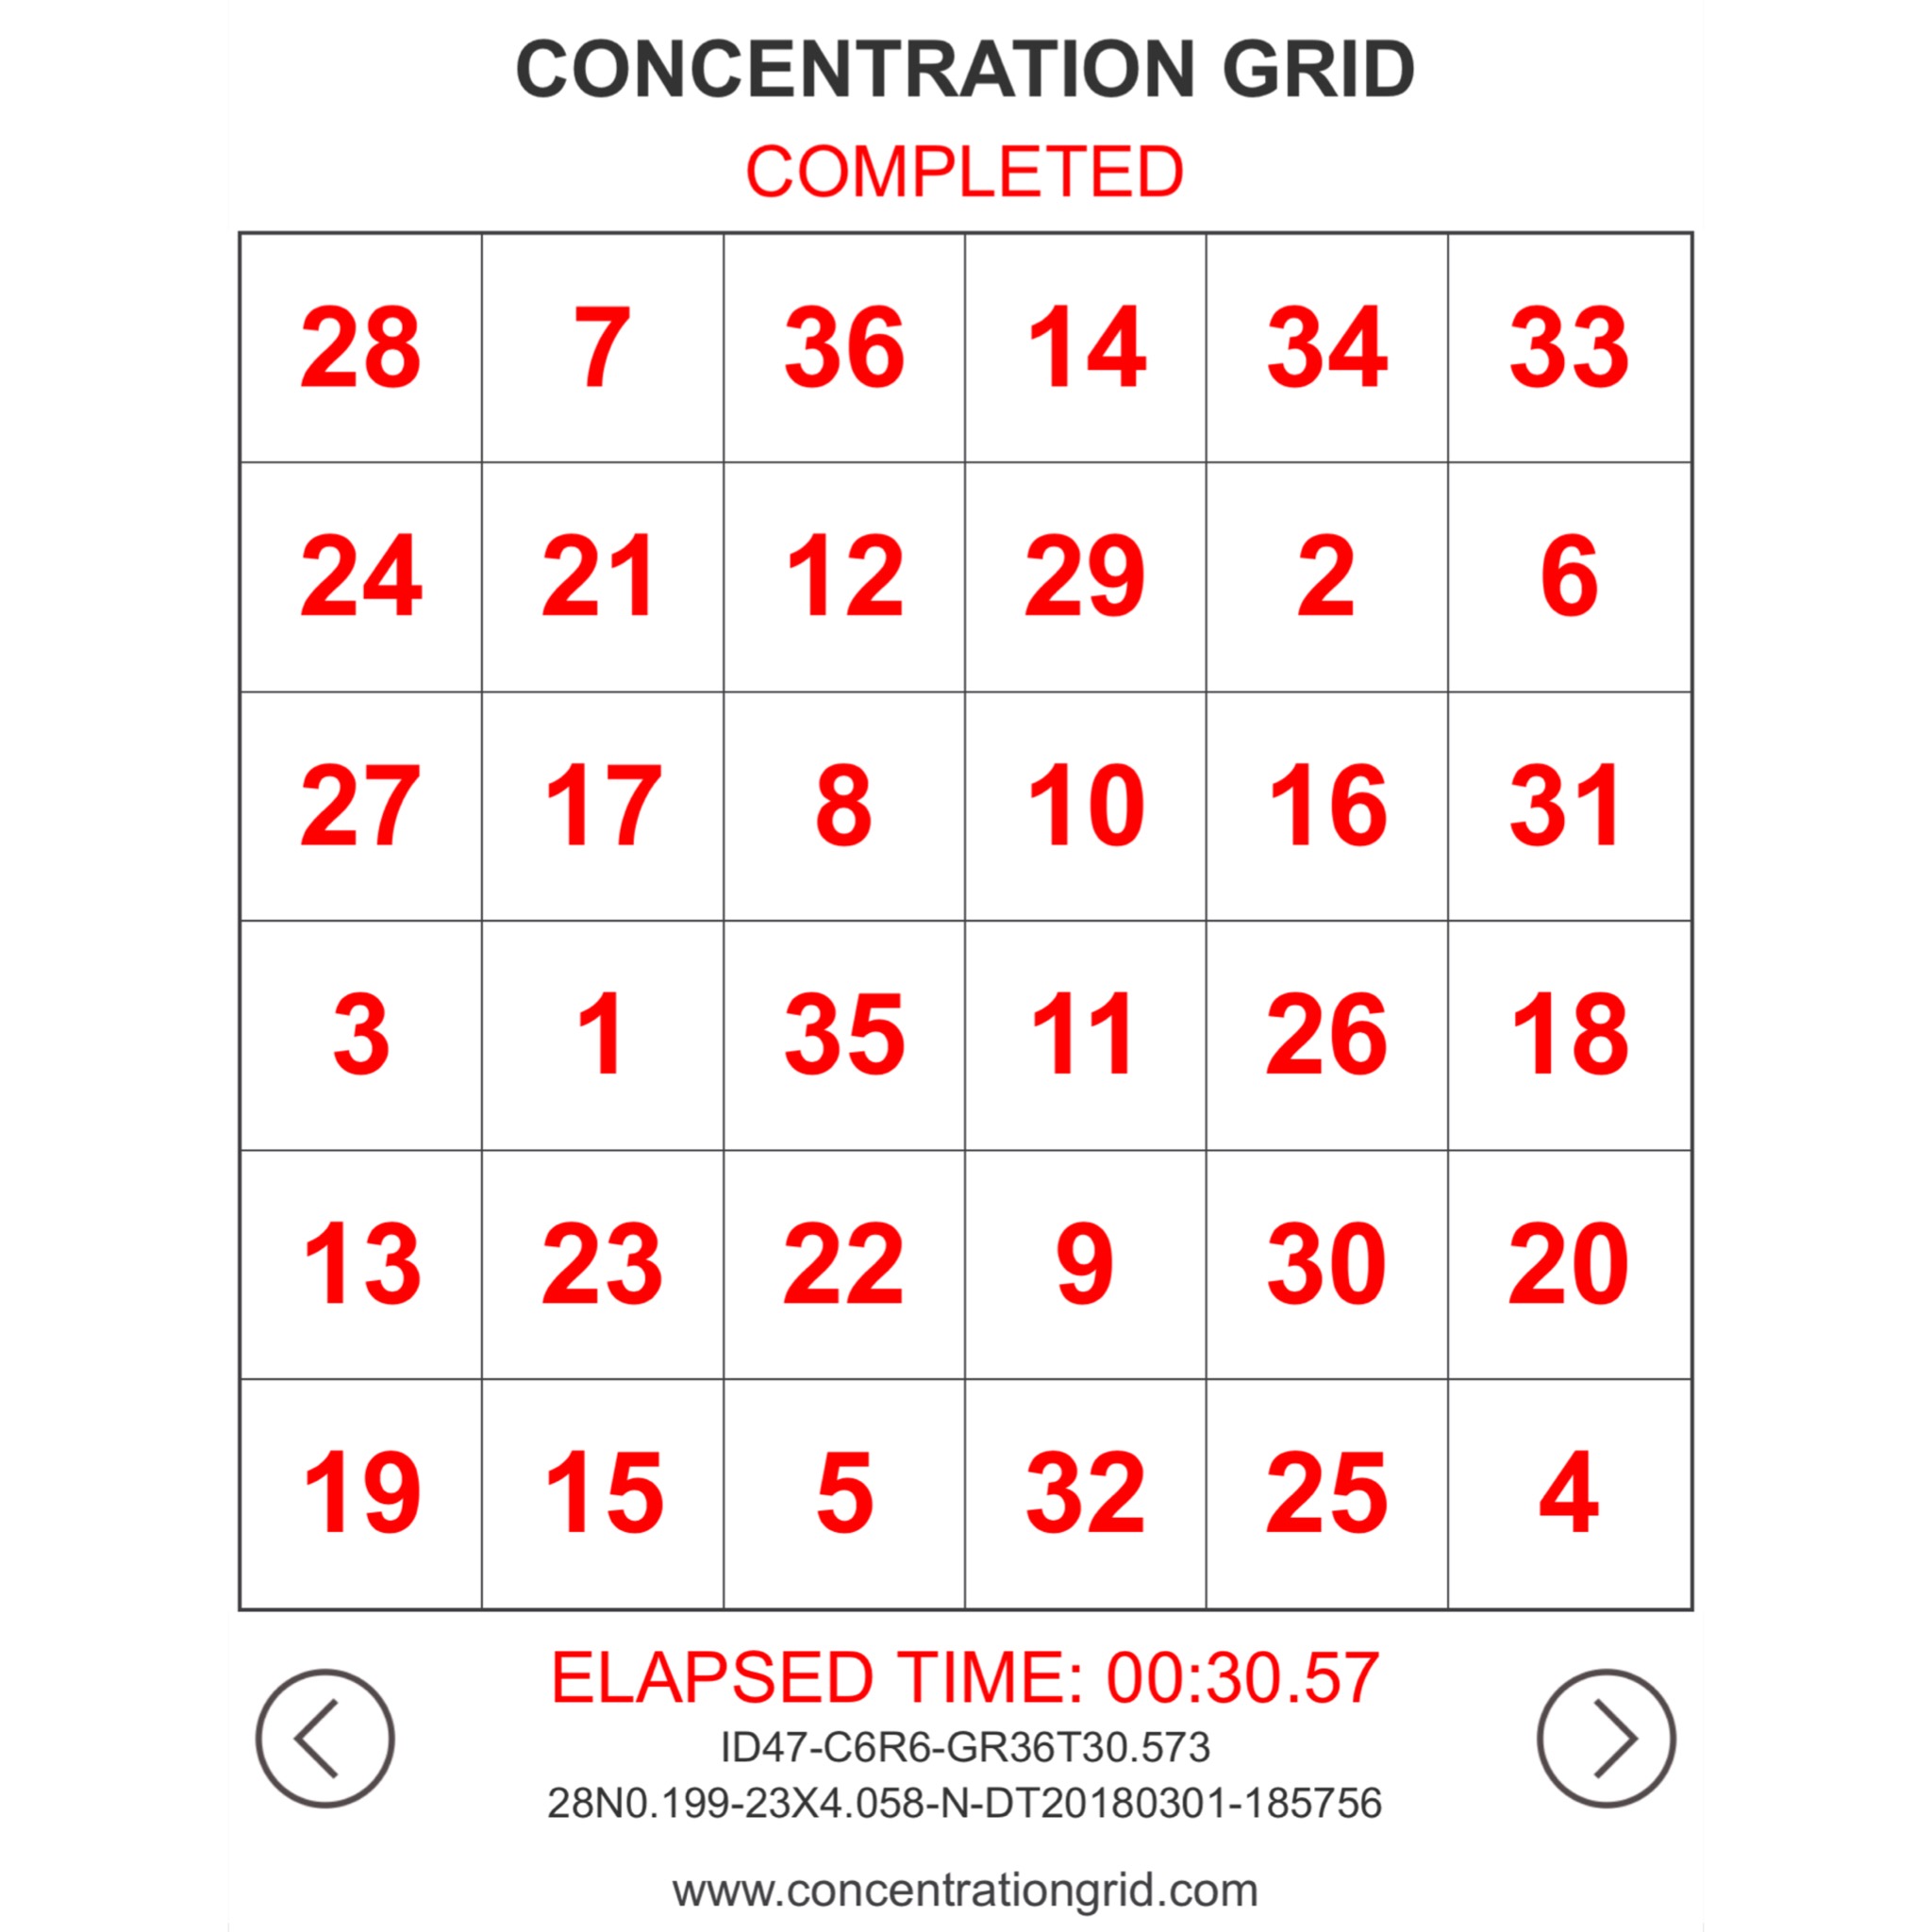 Concentration Grid is a mental skills training exercise/app for students, athletes, coaches, sports performance/psychology professionals, trainers, teachers, parents, etc. Use concentration grids a/k/a mental focus grids with student-athletes as a tool for assessment, practice and development of focus/attention skills … and for competitive challenge and fun. Make self-development a daily habit. #challengeyourself #concentrationgrid -www.concentrationgrid.com - www.mentalfocusgrids.com - www.tryconcentrationgrid.com